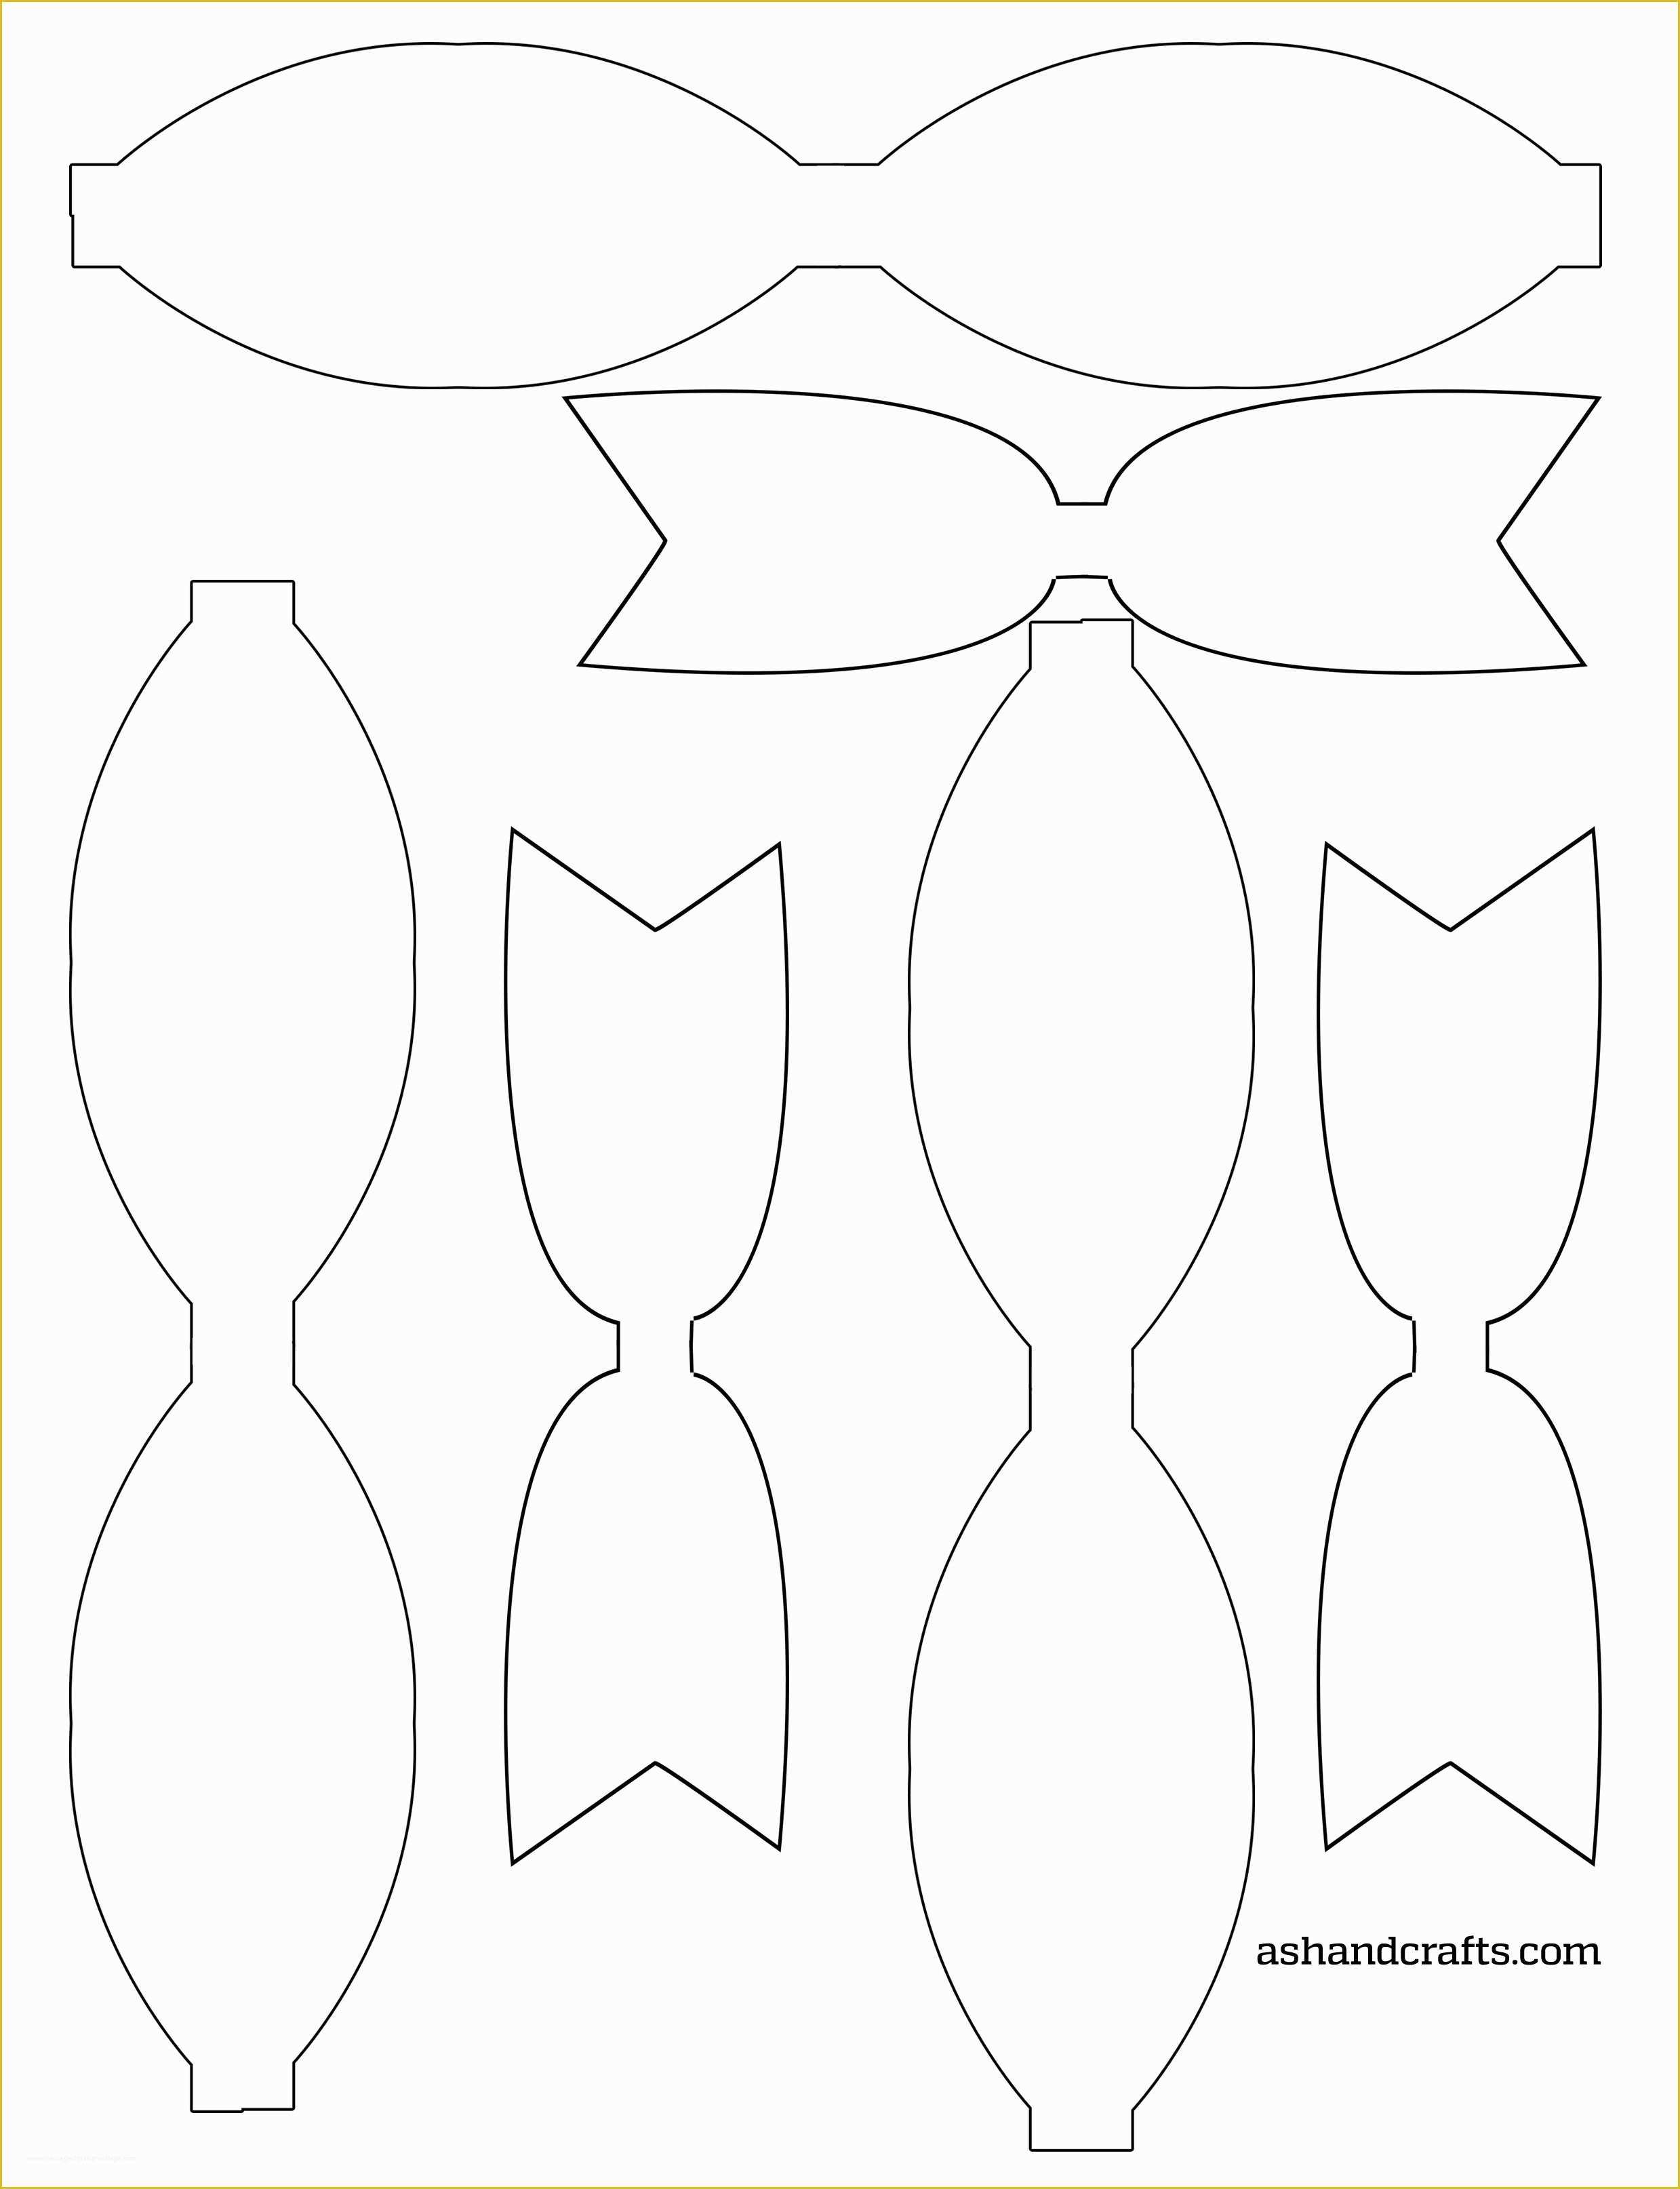 cheer-bow-template-printable-free-printable-free-templates-download